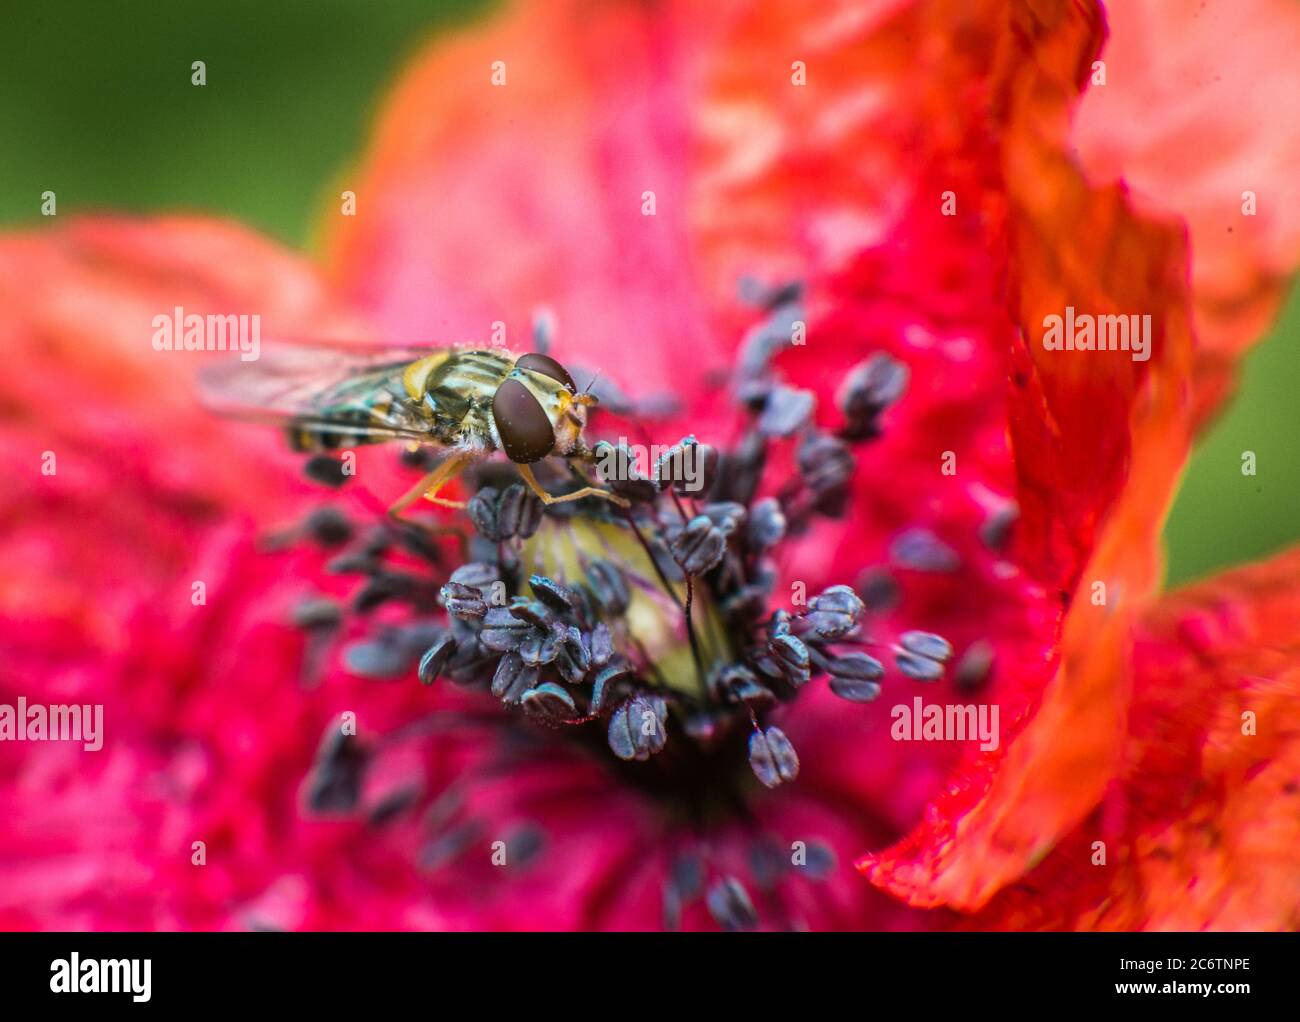 A group of wasps perform ecological roles pollinating a diverse array of plants. Stock Photo